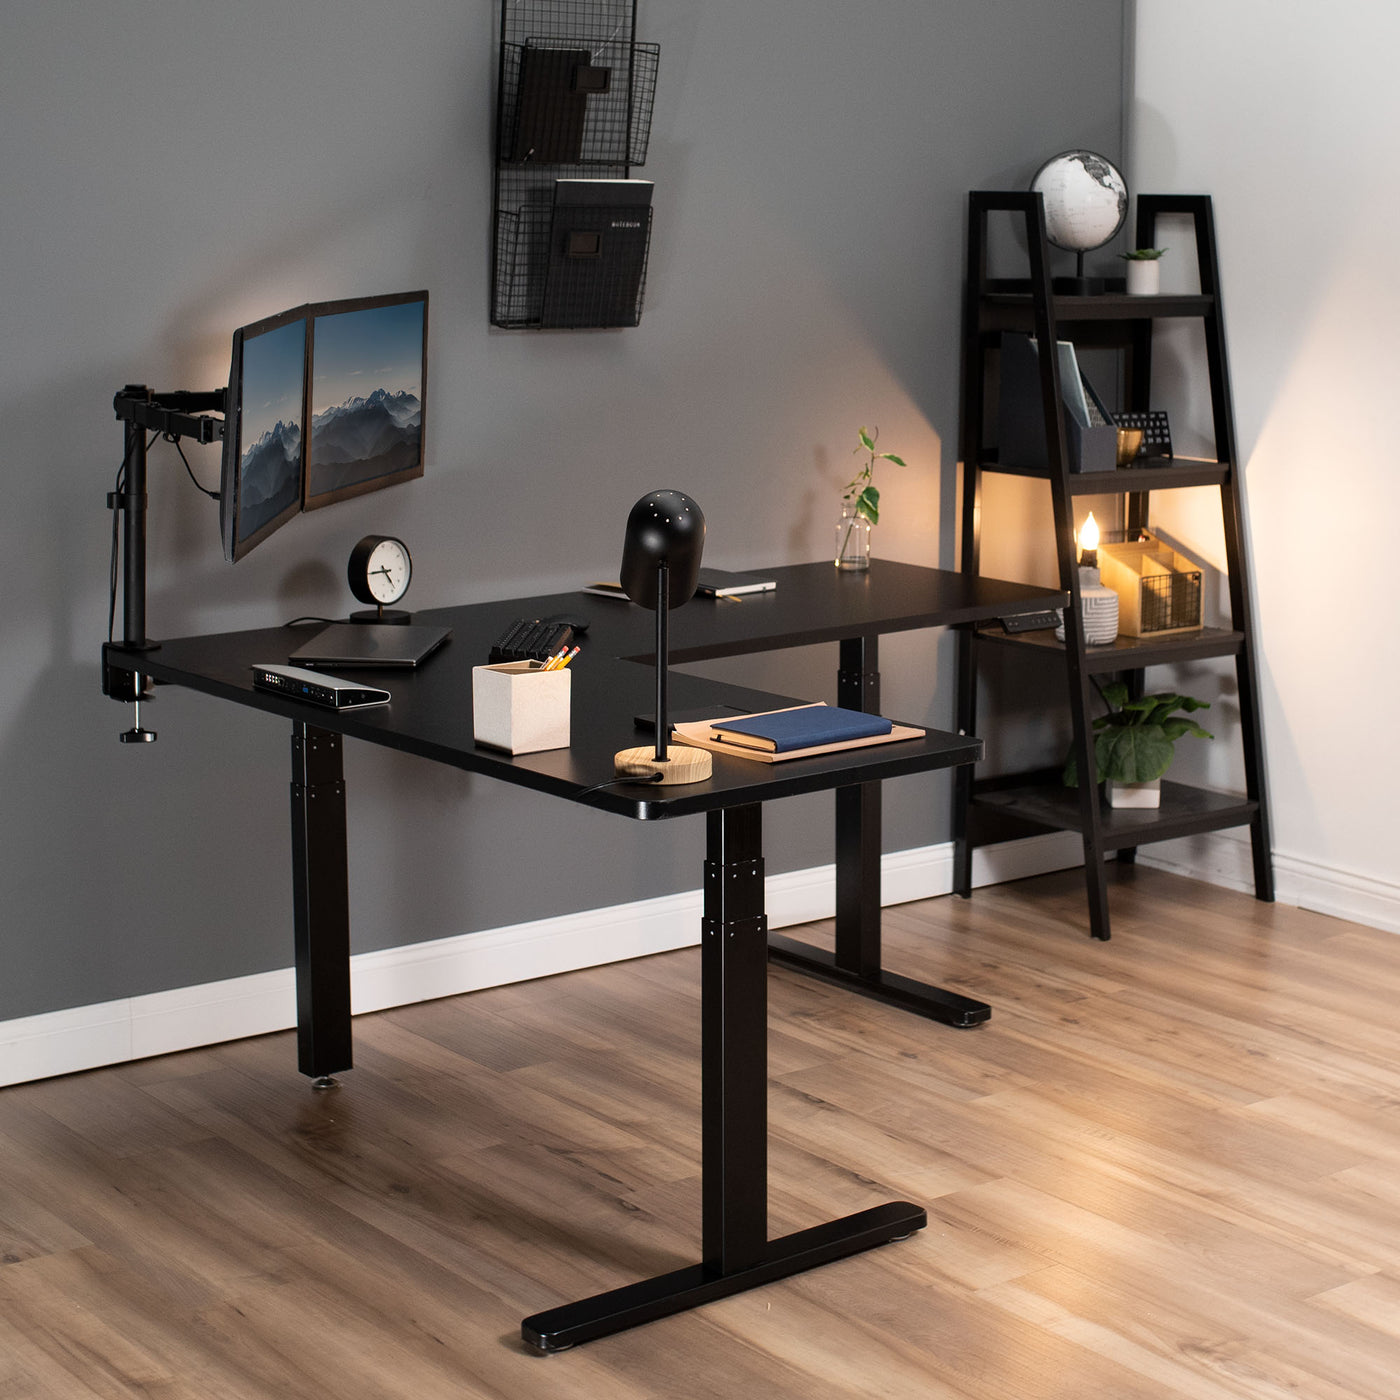 Modern furnished office space with electric desk for ergonomic workspaces.